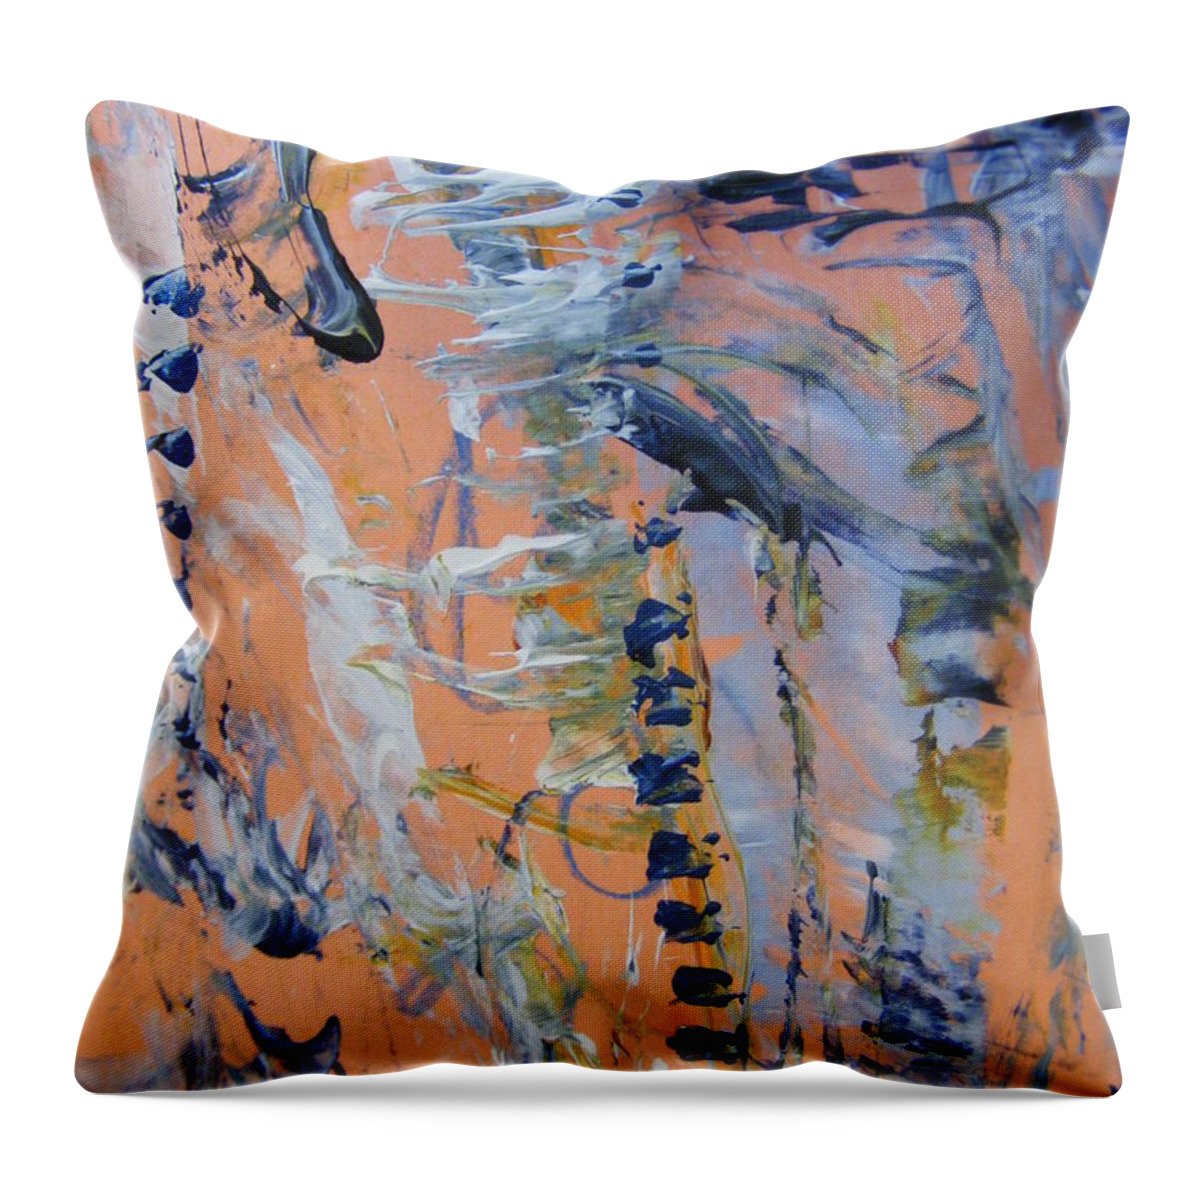 Acrylic Painting Throw Pillow featuring the painting Spring 0 by Nancy Kane Chapman